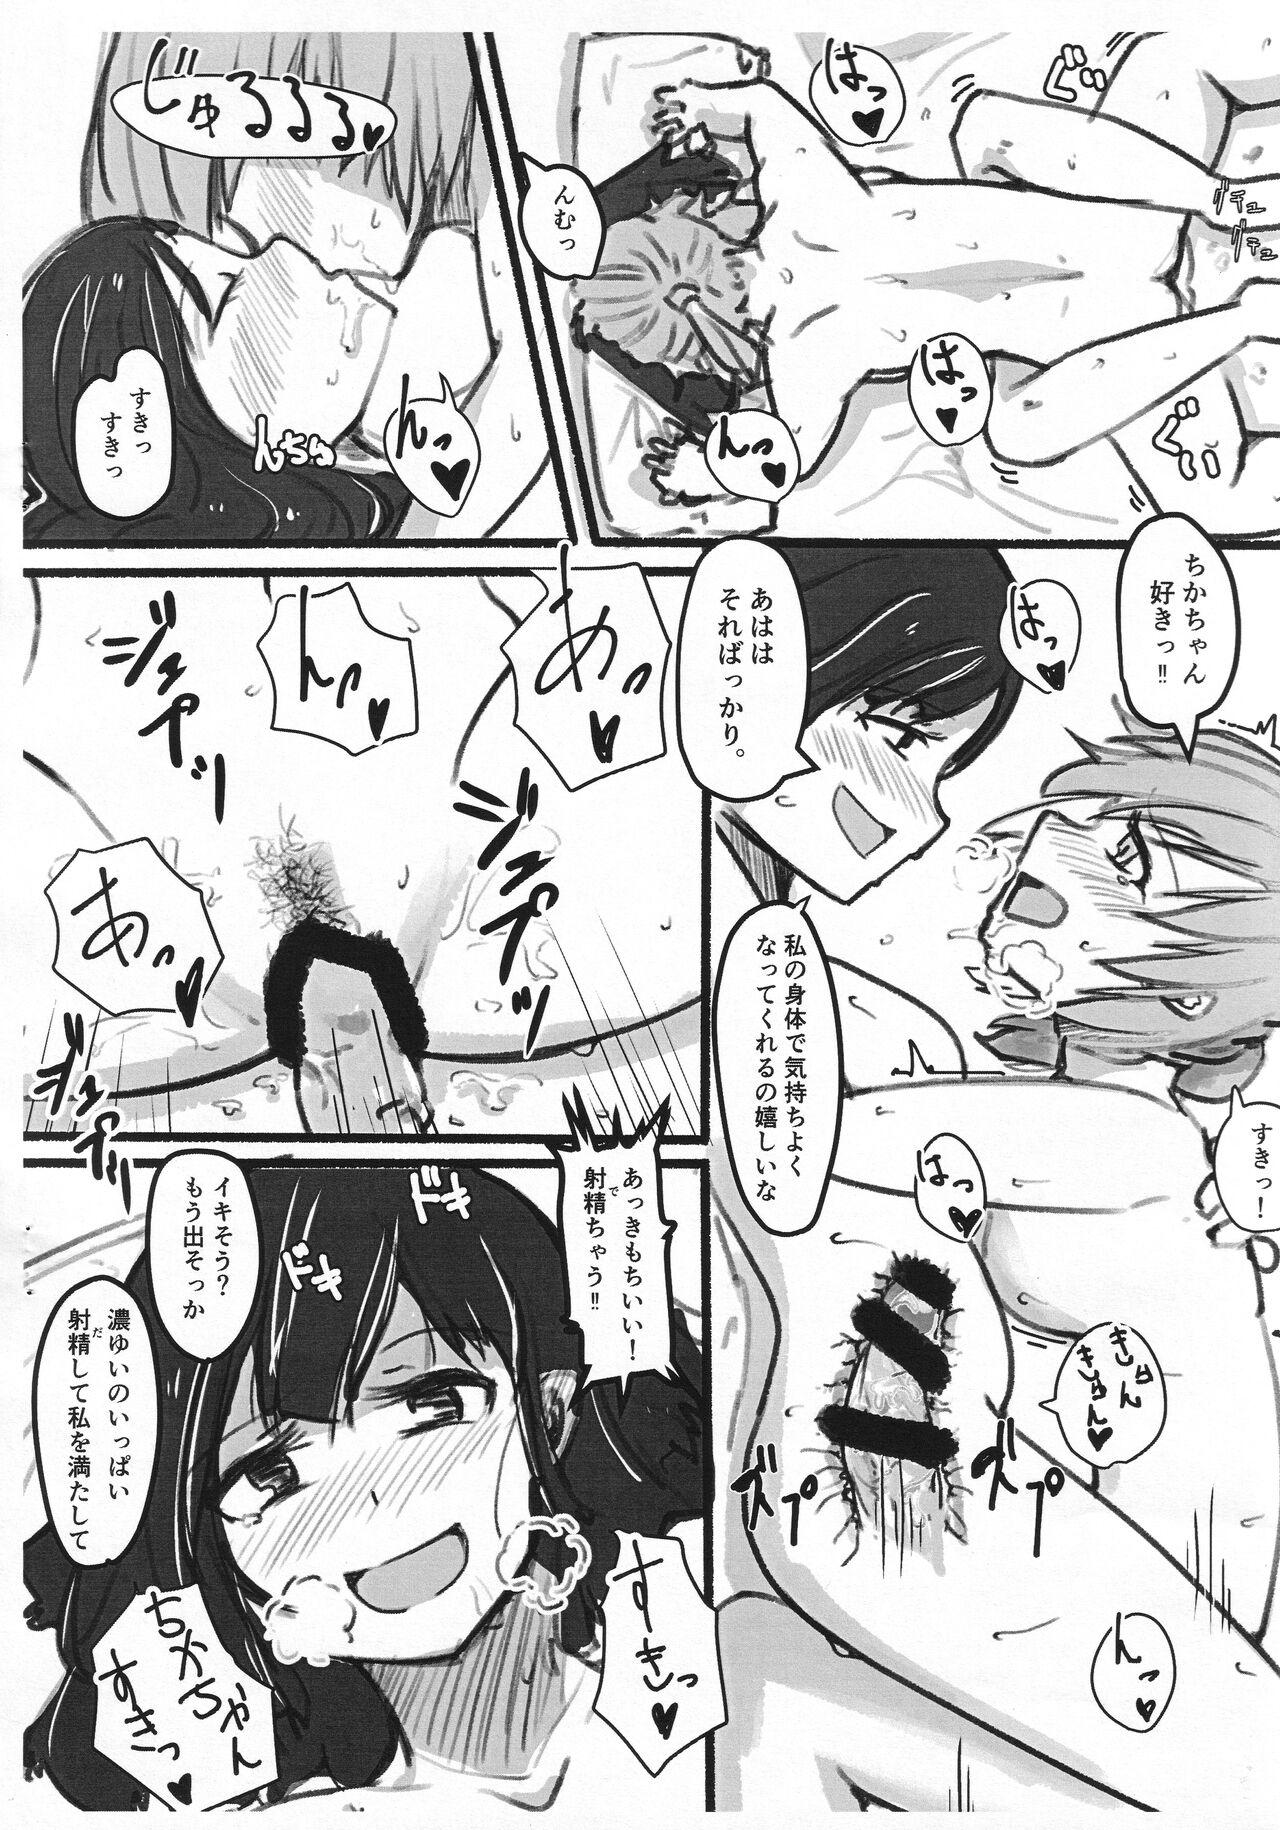 Publico 不品行なふたり。 Chicks - Page 11